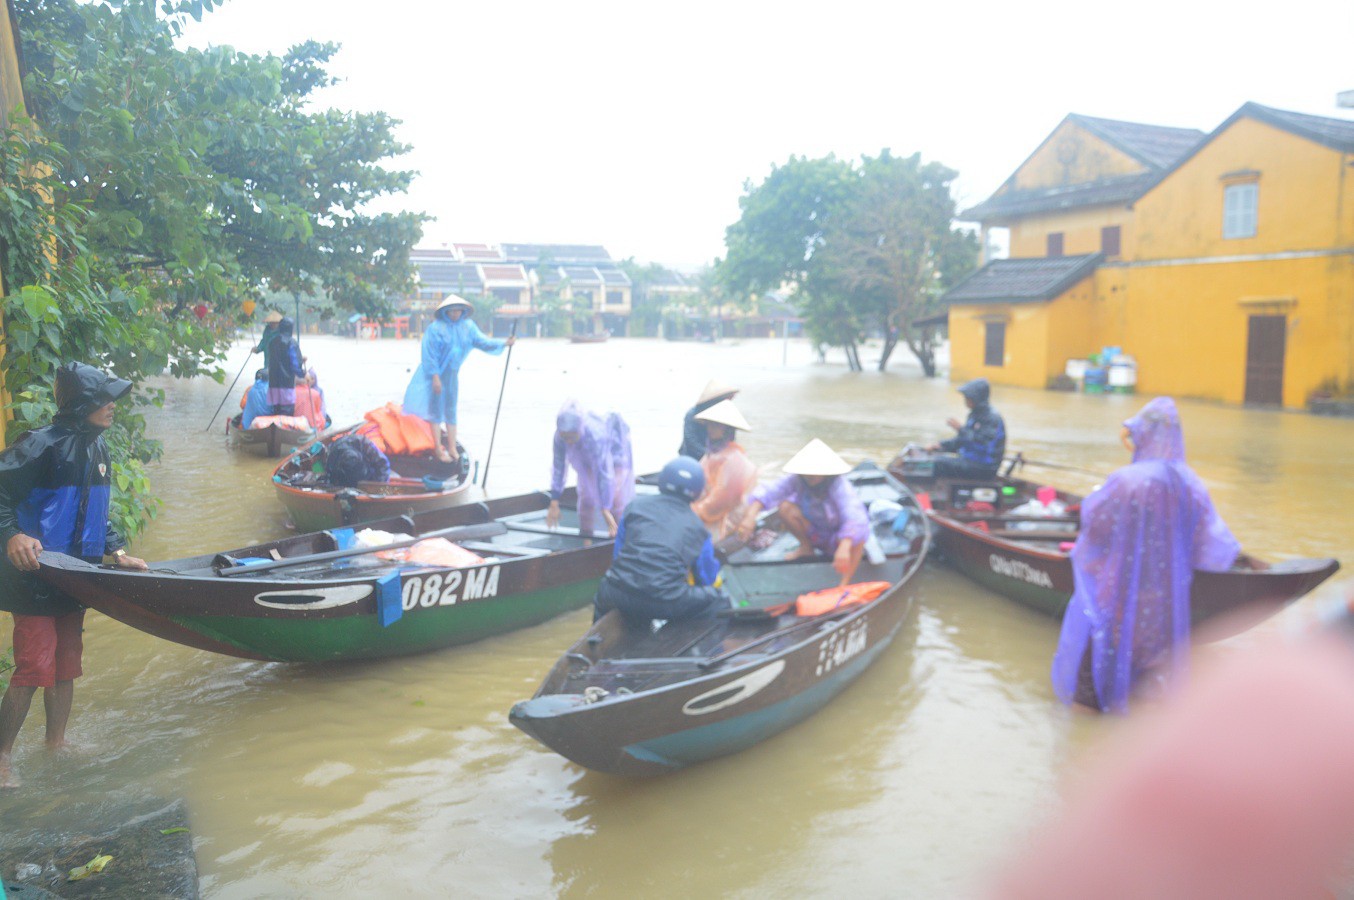 Local residents travel by boat due to the inundation.